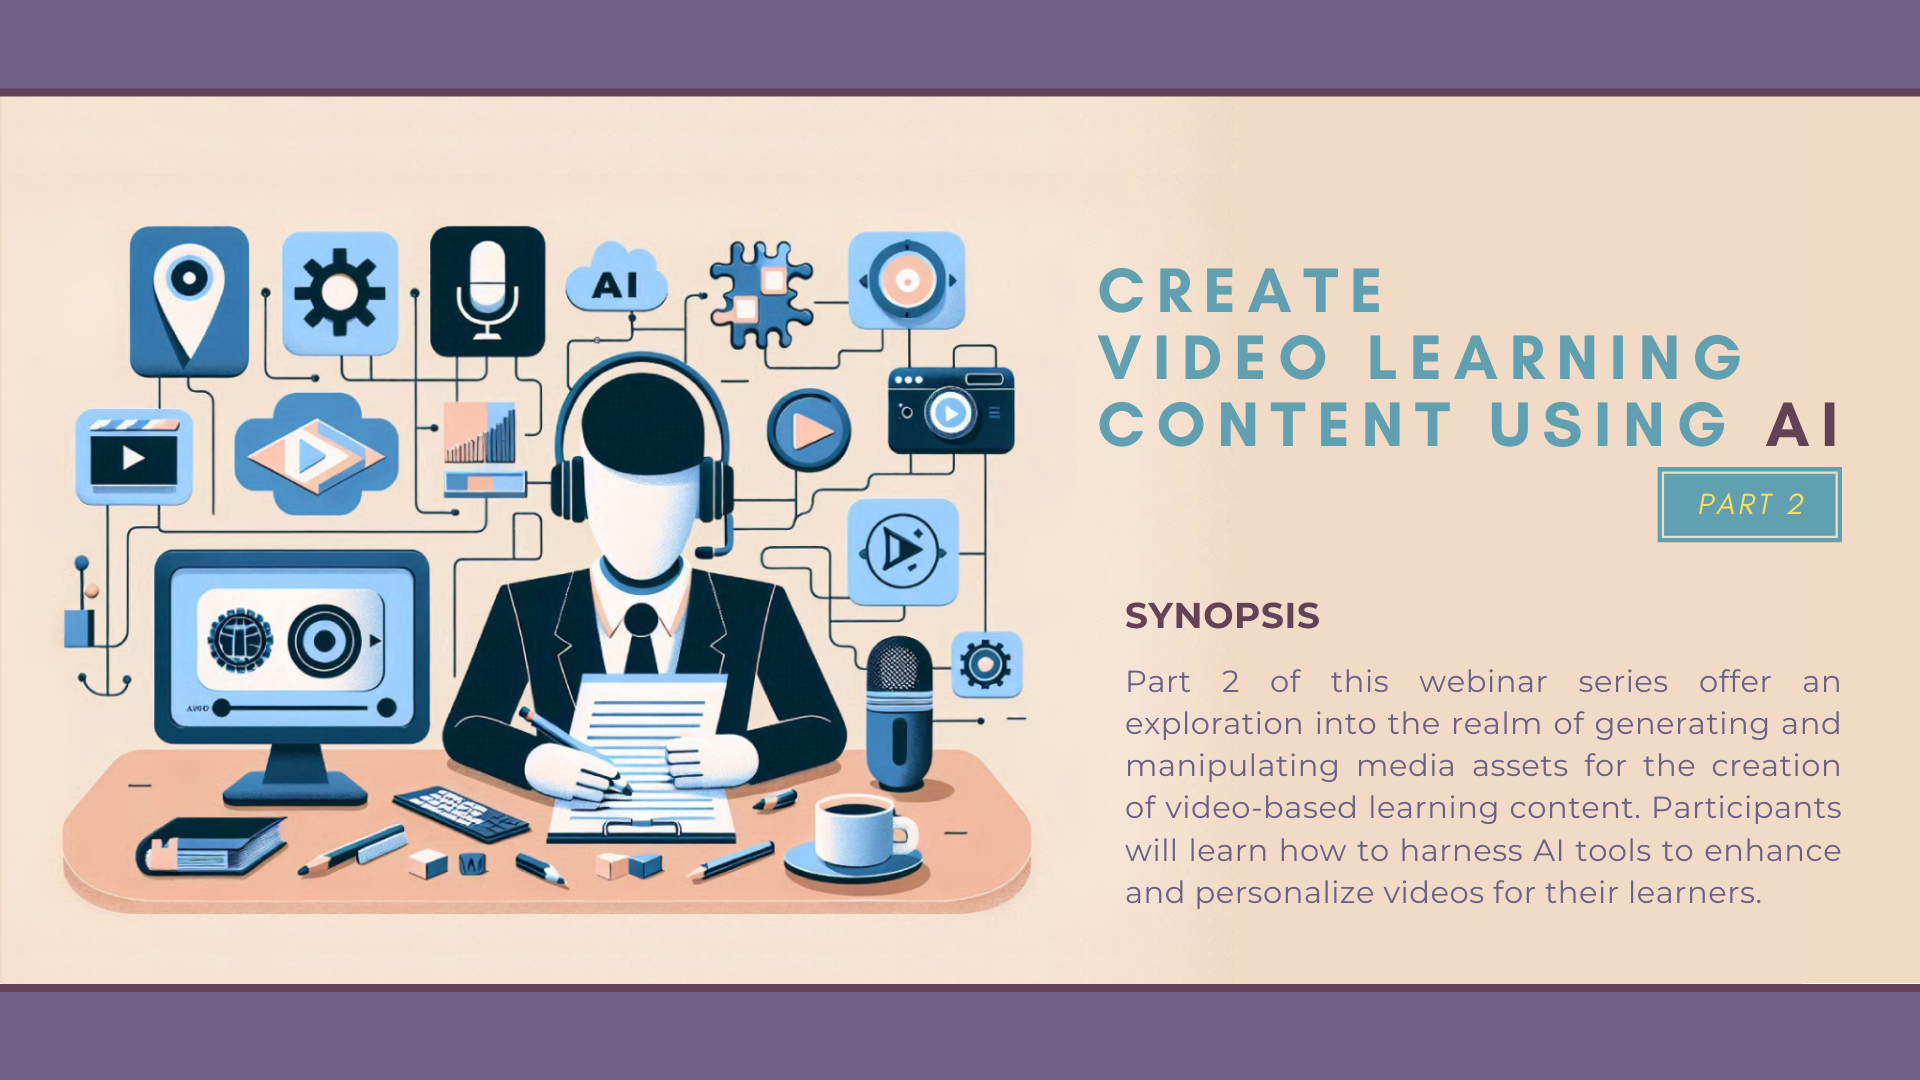 Creating Video Learning Content using AI - Part 2